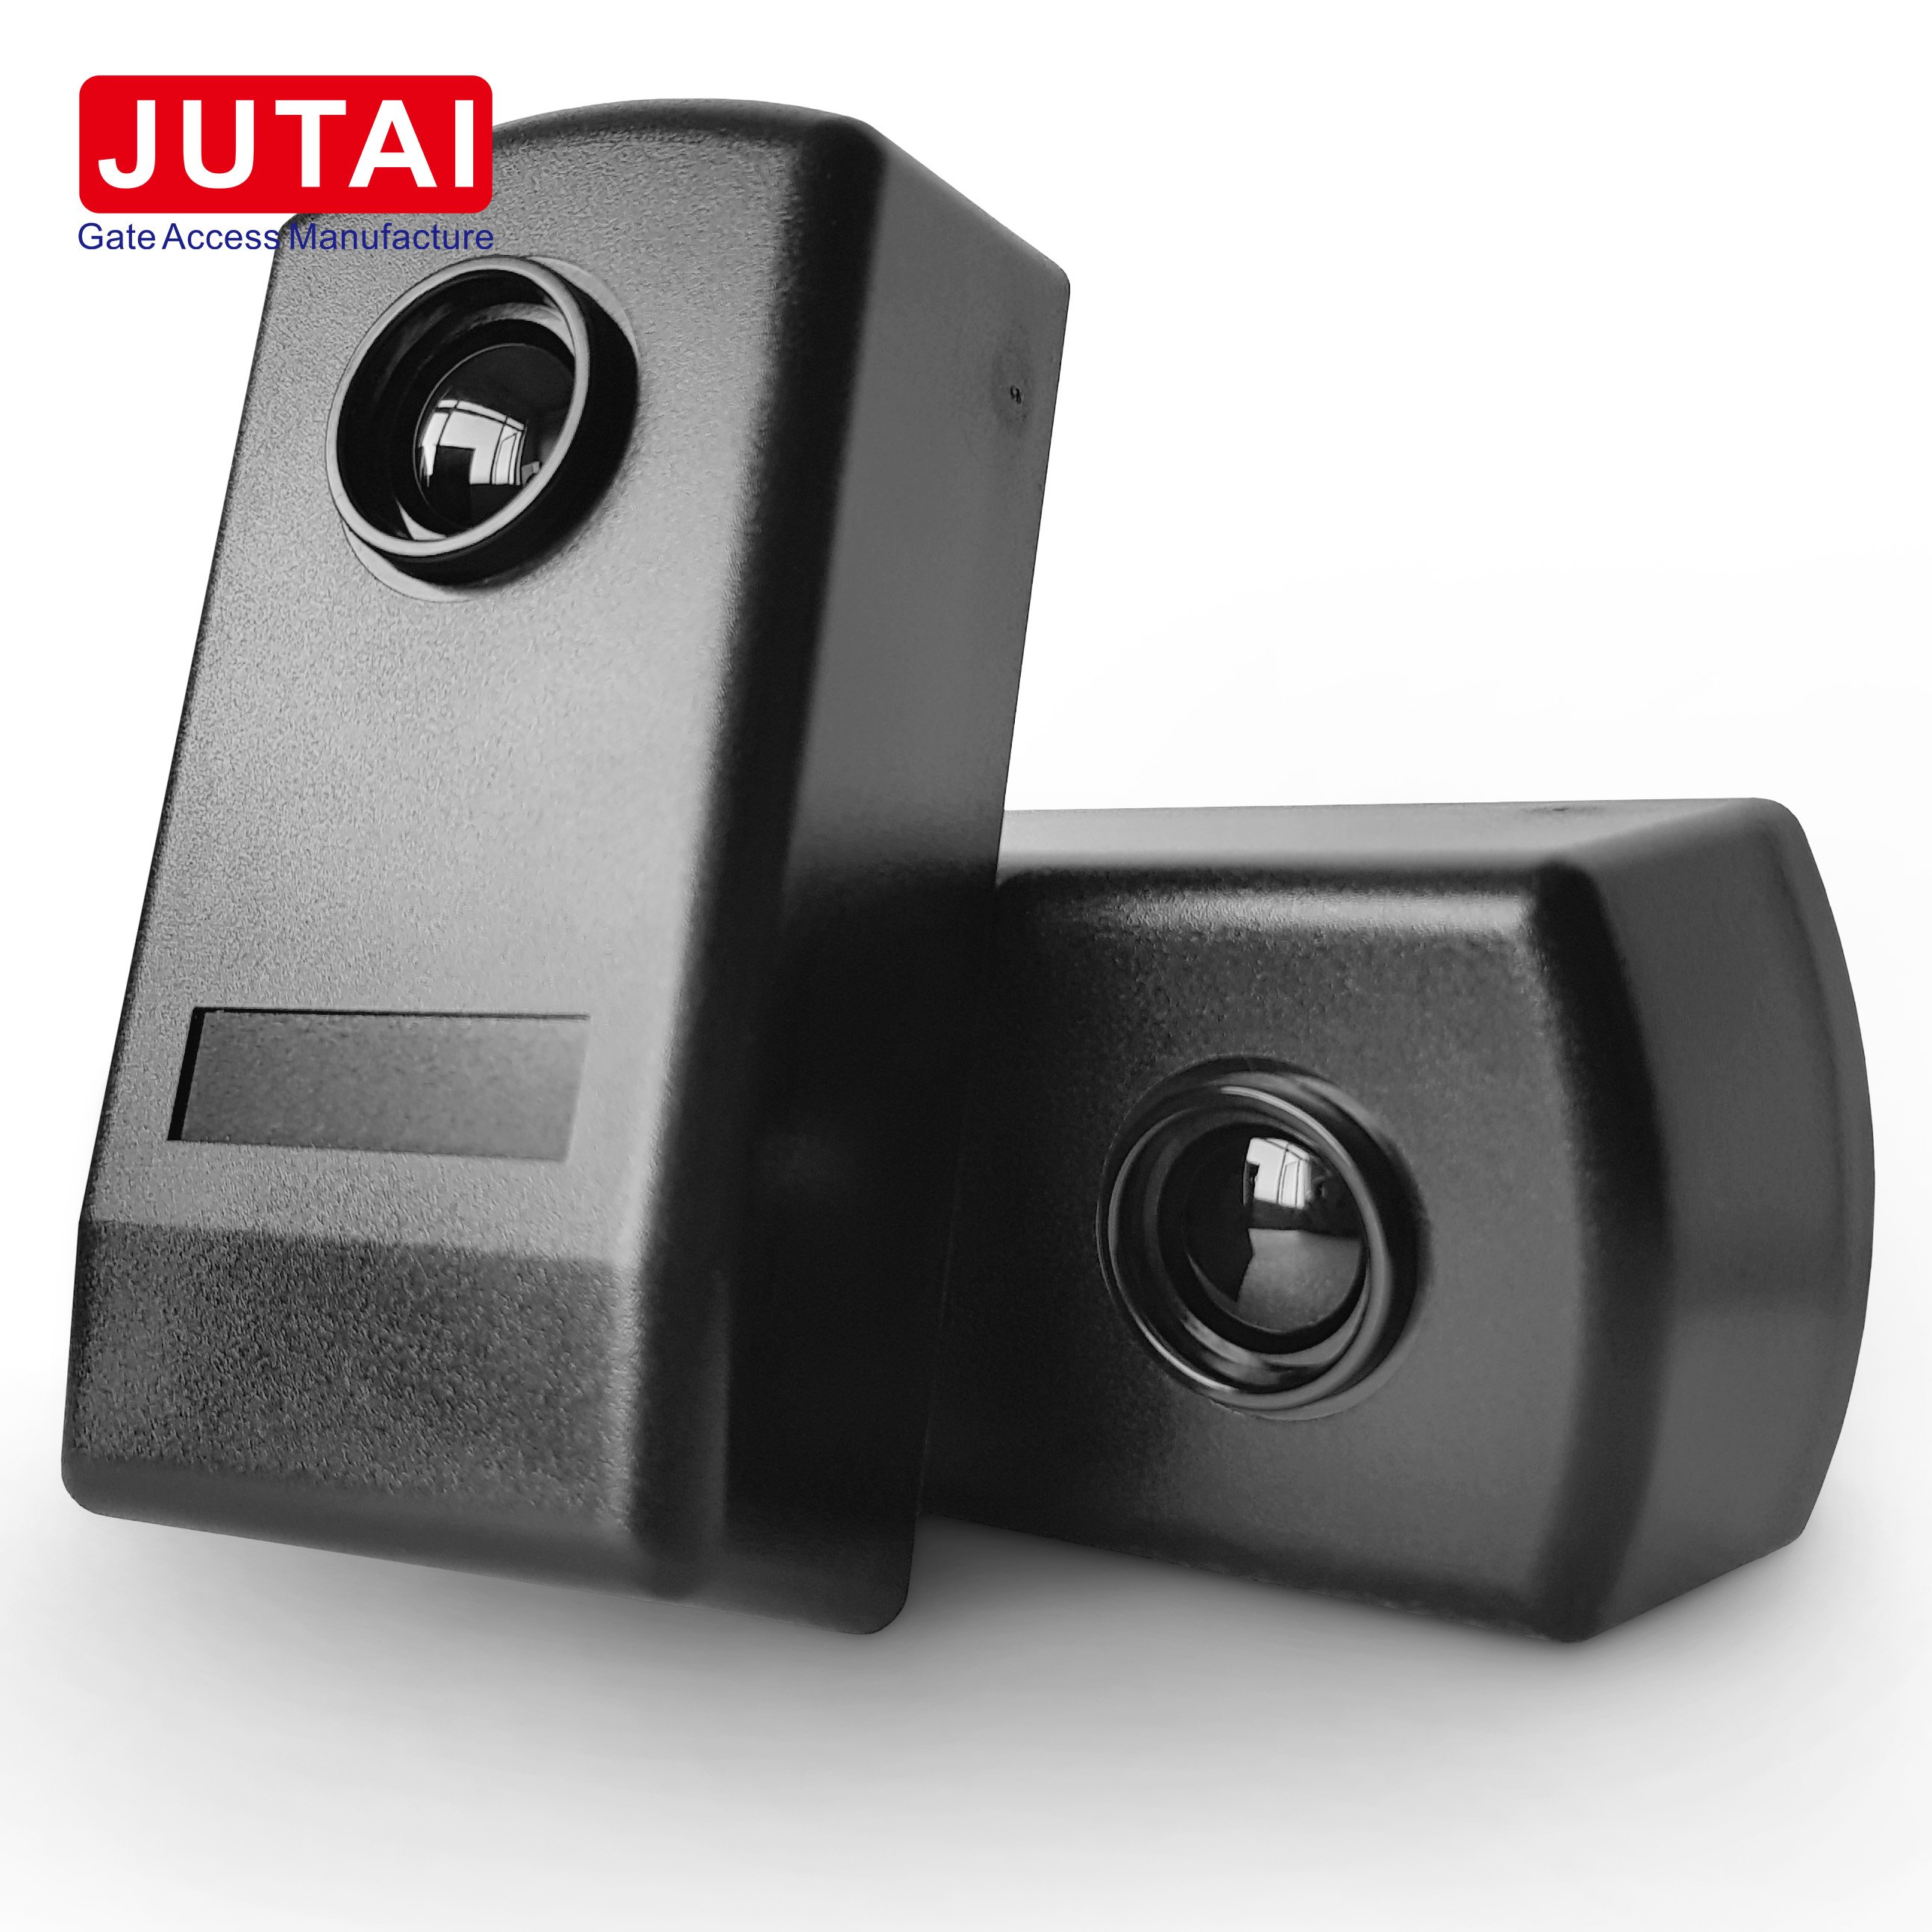 Infrared Photocell Sensor IR-20M Safety To Barrier Gate Open and Close